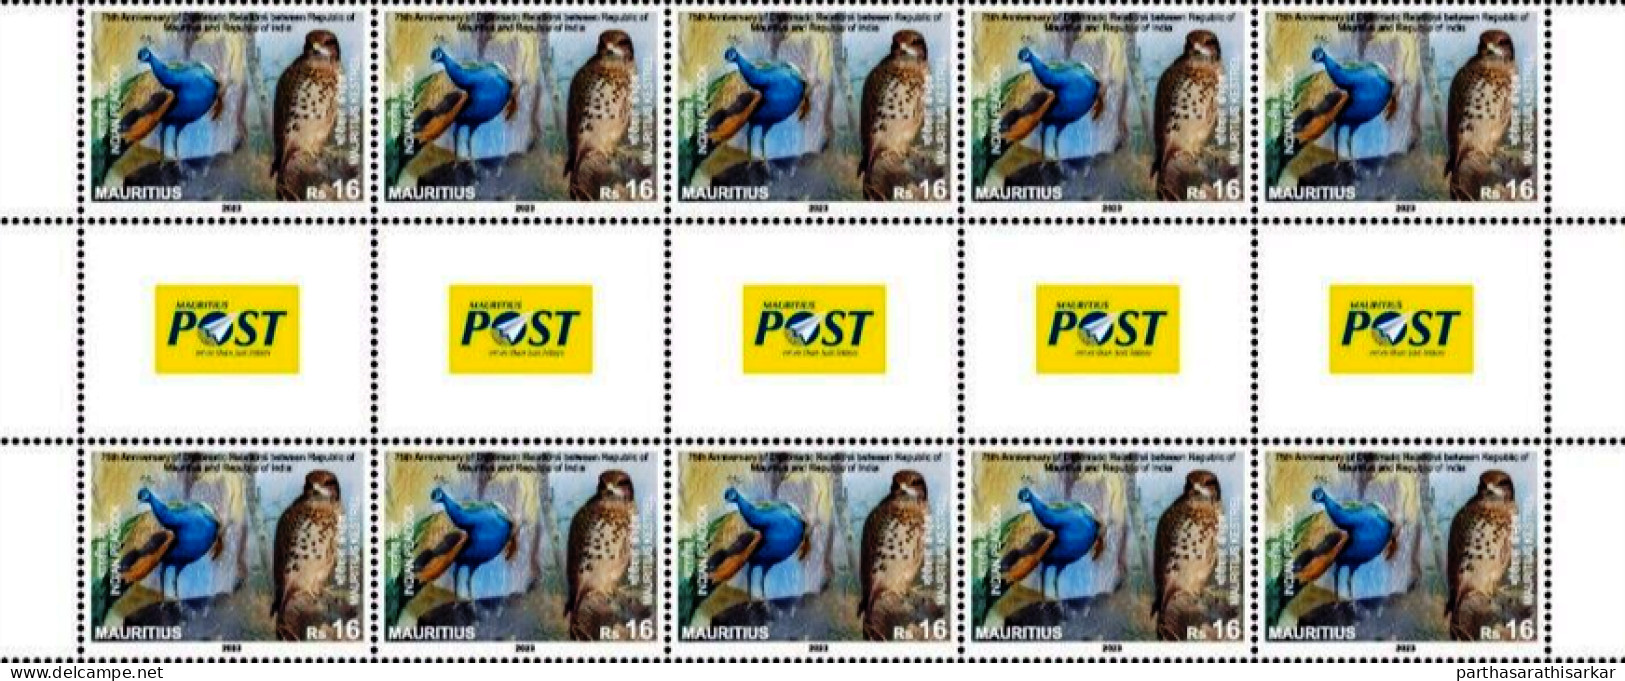 MAURITIUS 2023 JOINT ISSUE 75TH ANNIV OF DIPLOMATIC RELATIONS BETWEEN INDIA MAURITIUS BIRDS GUTTER PAIR OF 10 STAMPS MNH - Joint Issues